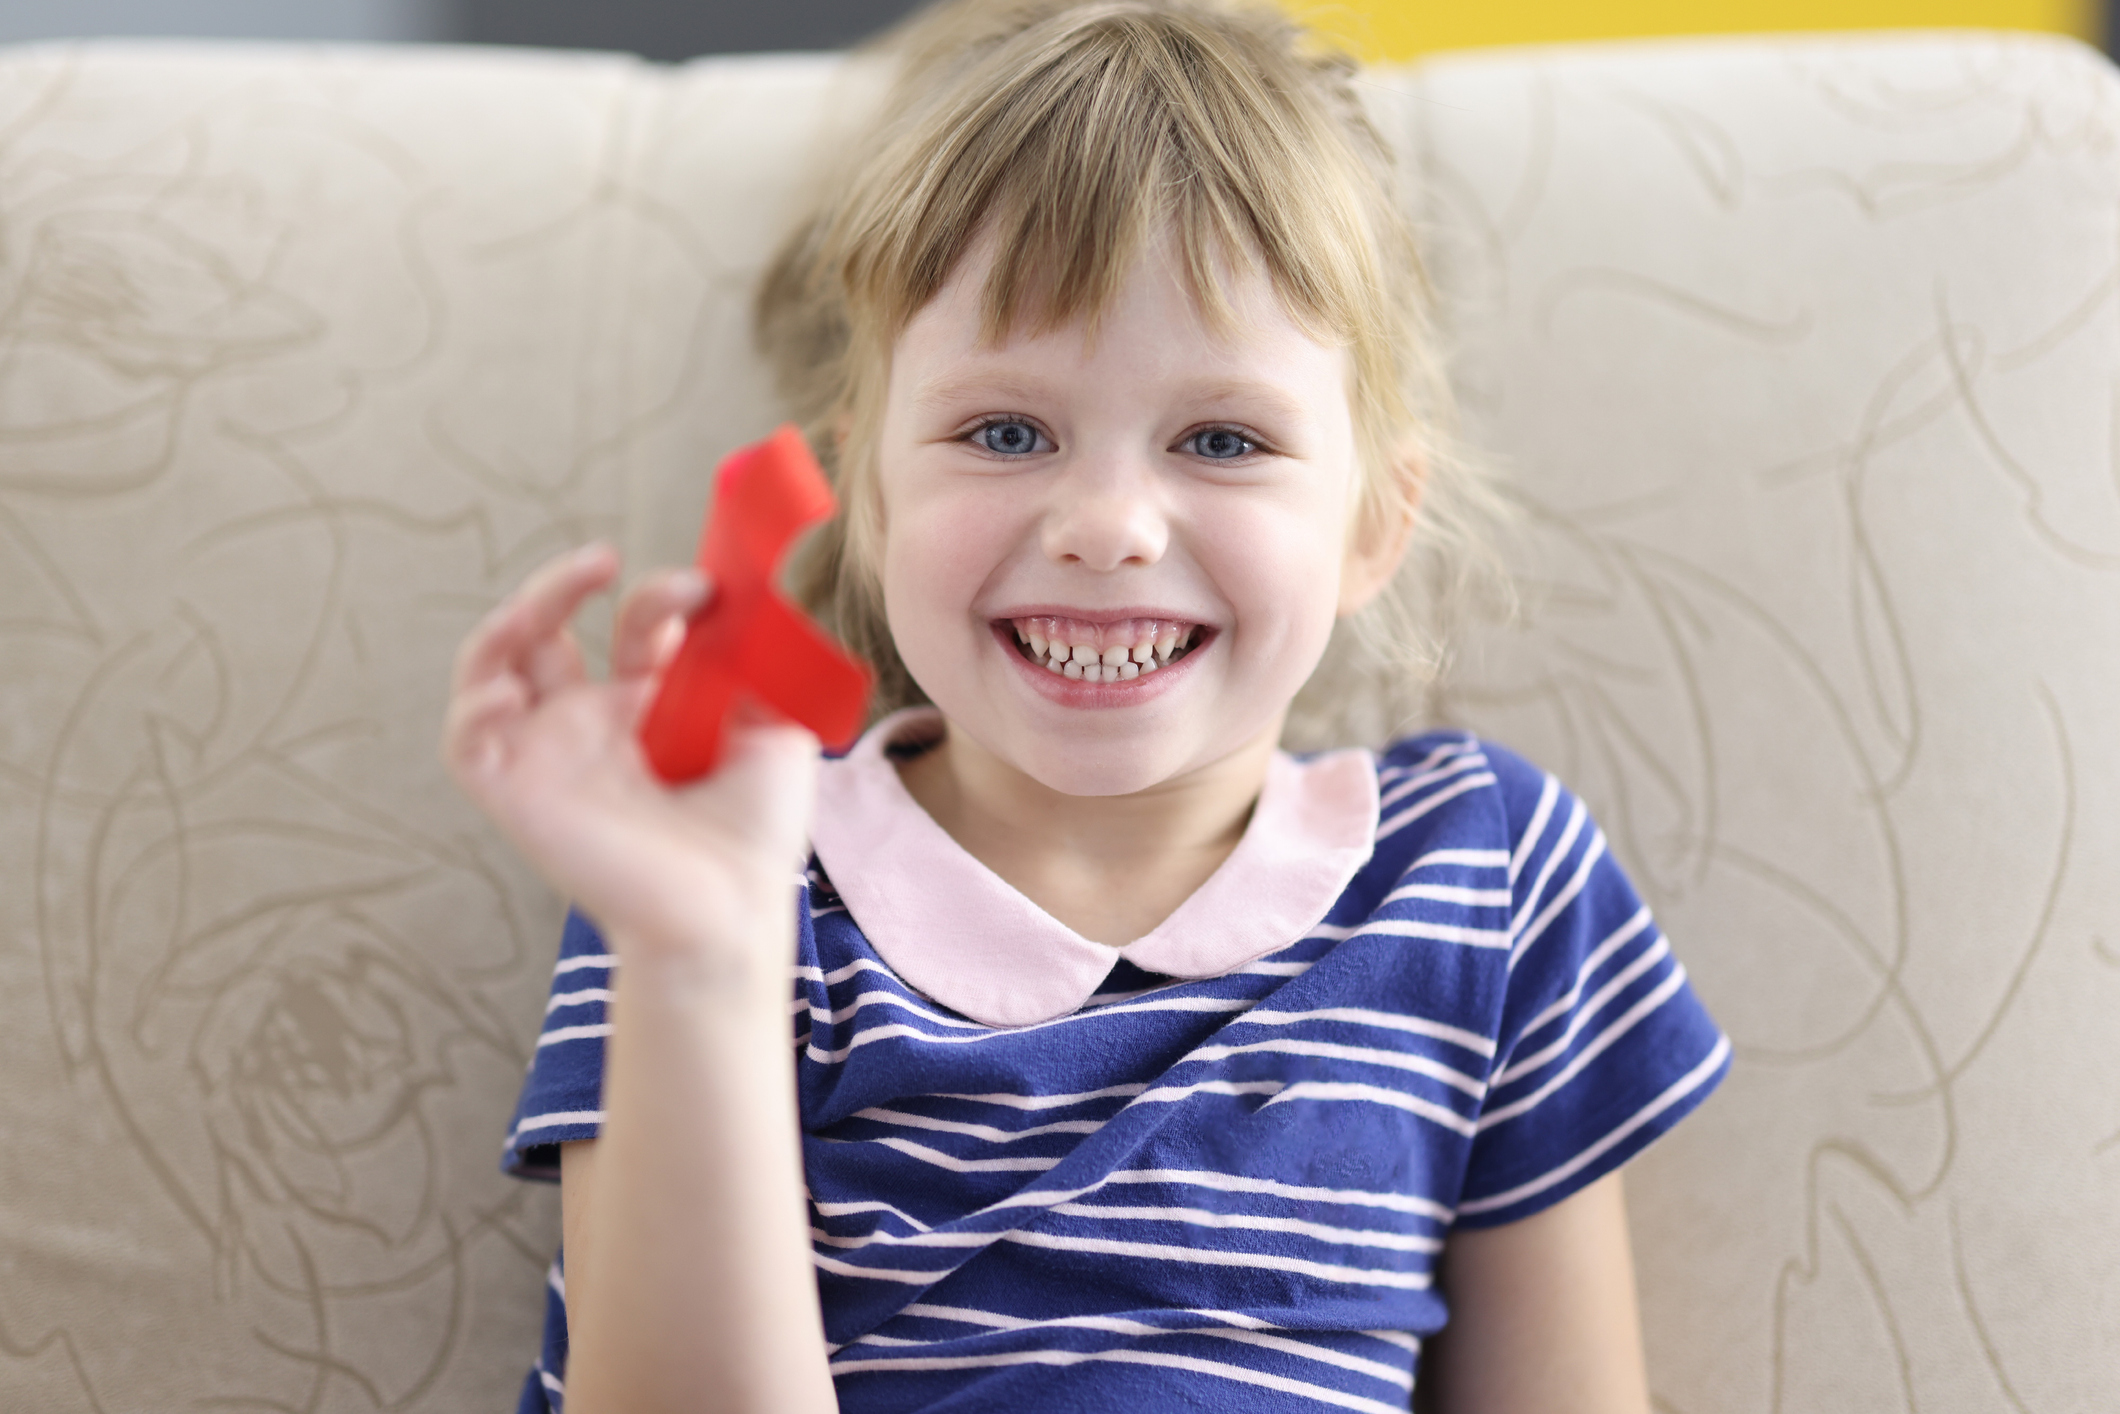 Little girl smiles and holds in her hand a red ribbon